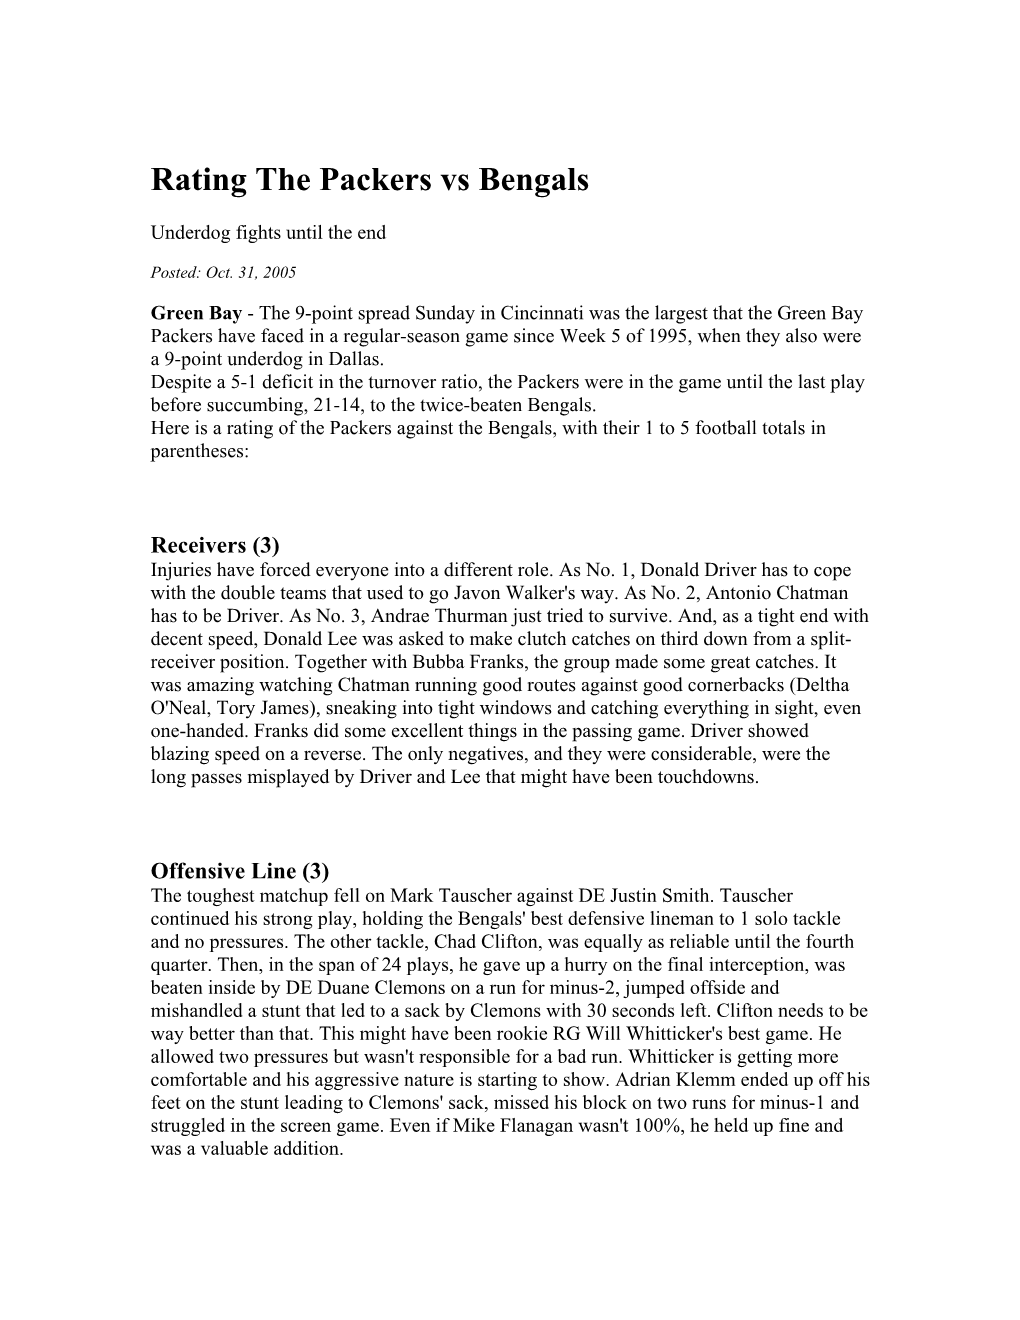 Rating the Packers Vs Bengals